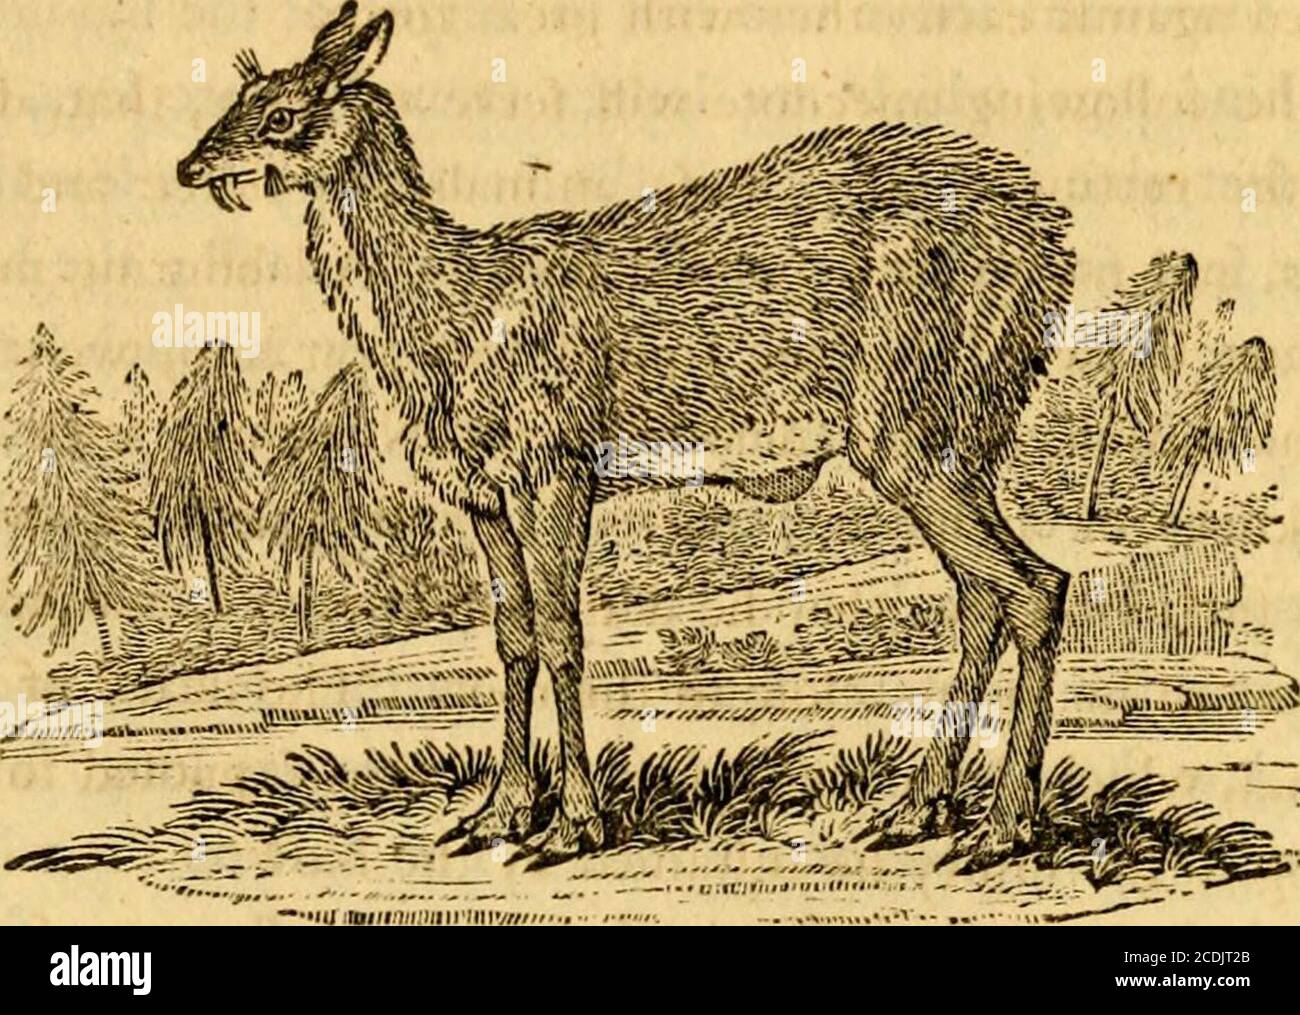 . A general history of quadrupeds : the figures engraved on wood . ning, darted againft the wood-workwith fuch violence, that he daflied it to pieces, and brokeoff one of his horns clofe to the root. The death of theanimal, which happened foon after, was fuppofed to beowing to the injury he fuftained by the blow. Bernier fays, that it is the favourite amufement of theMogul Emperor to hunt the Nyl-ghau j and that he killsthem in great numbers, and diftributes quarters of thtmto his omrahs -, which (hews that they are efteemed goodand delicious food. The Nyl-ghau is frequently brought from the i Stock Photo